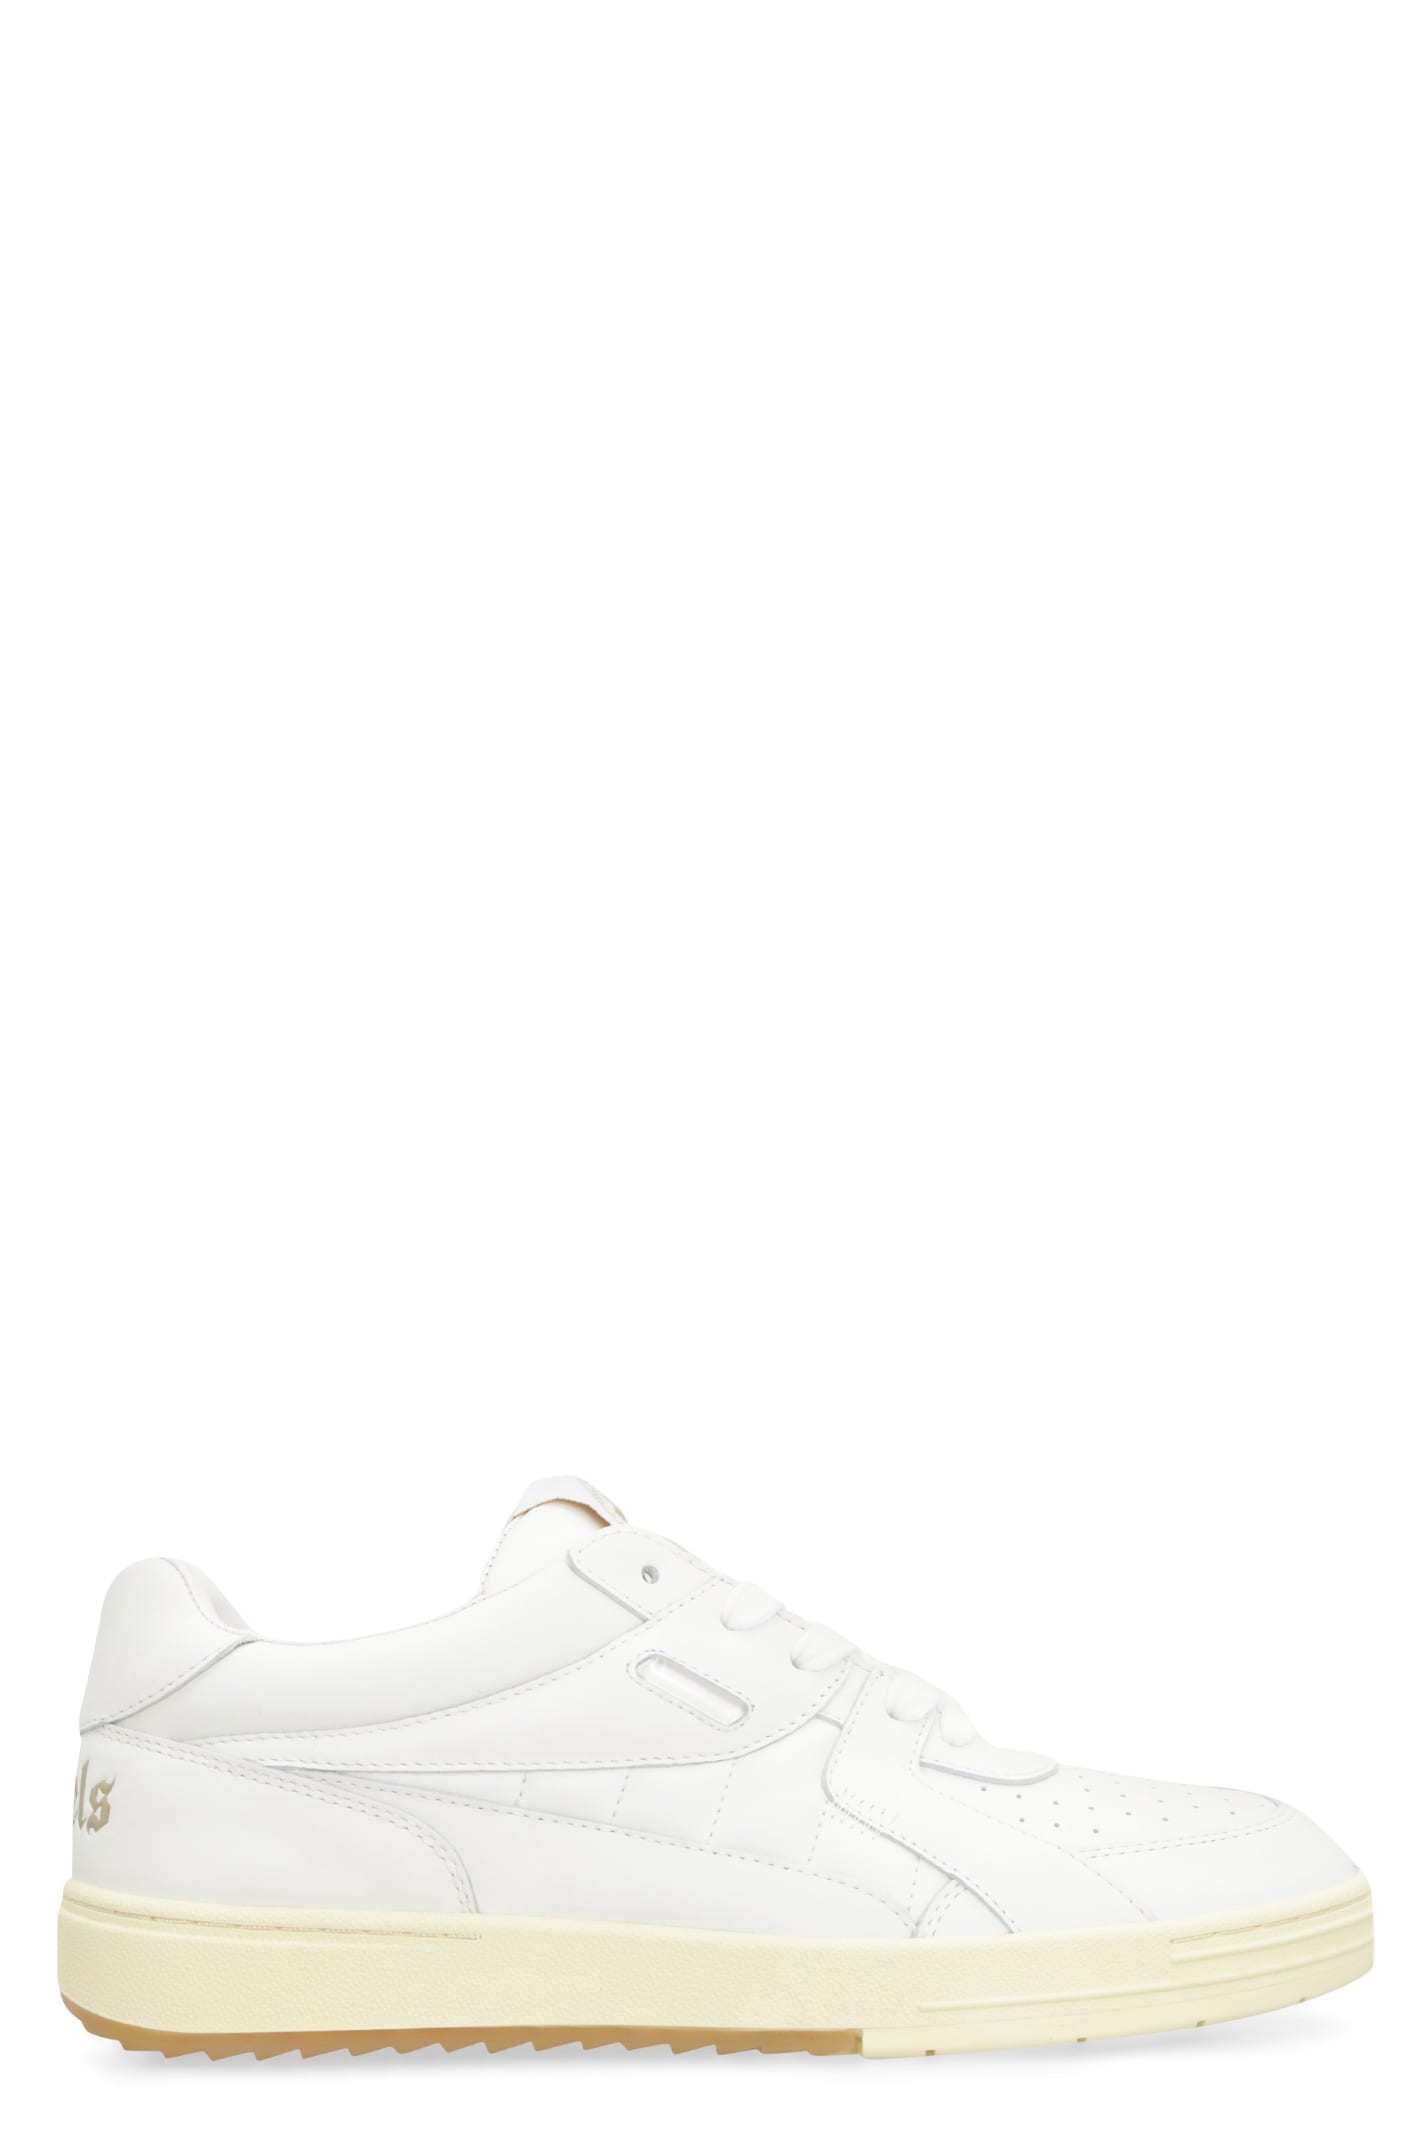 Palm Angels University Low-top Sneakers In White